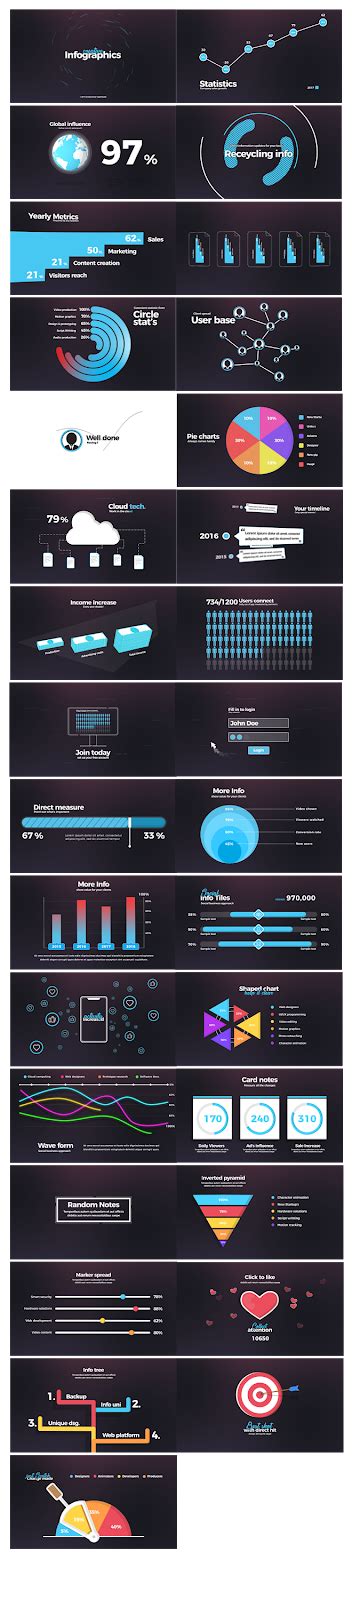 INFOGRAPHICS AFTER EFFECTS TEMPLATE | After effects templates, Startup